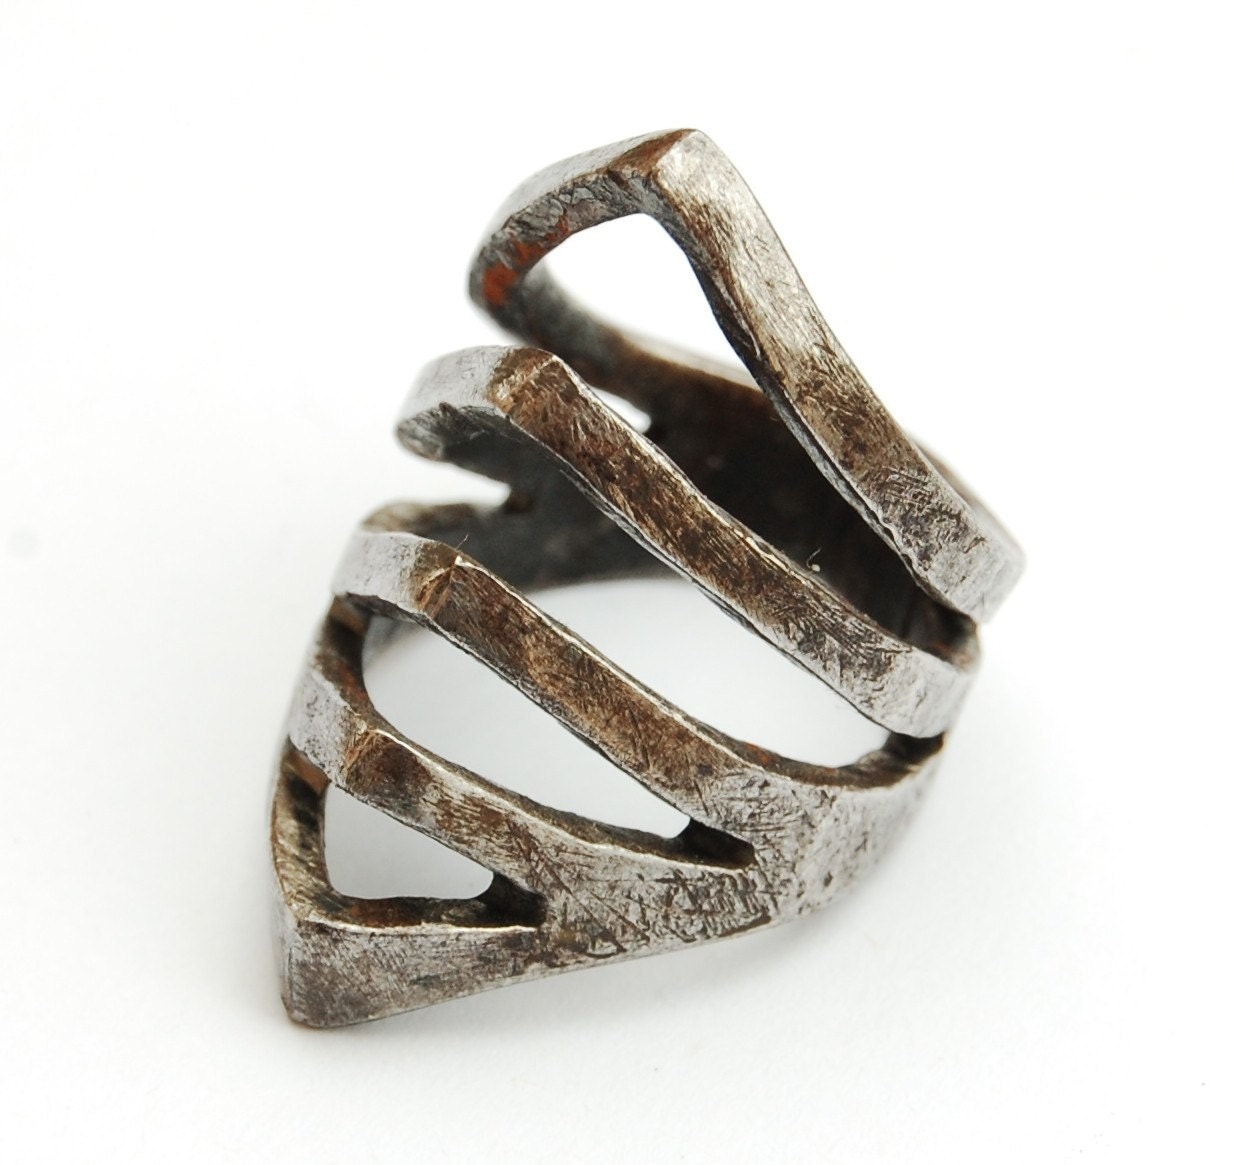 Ribcage iron ring by blindspotjewellery at Etsy